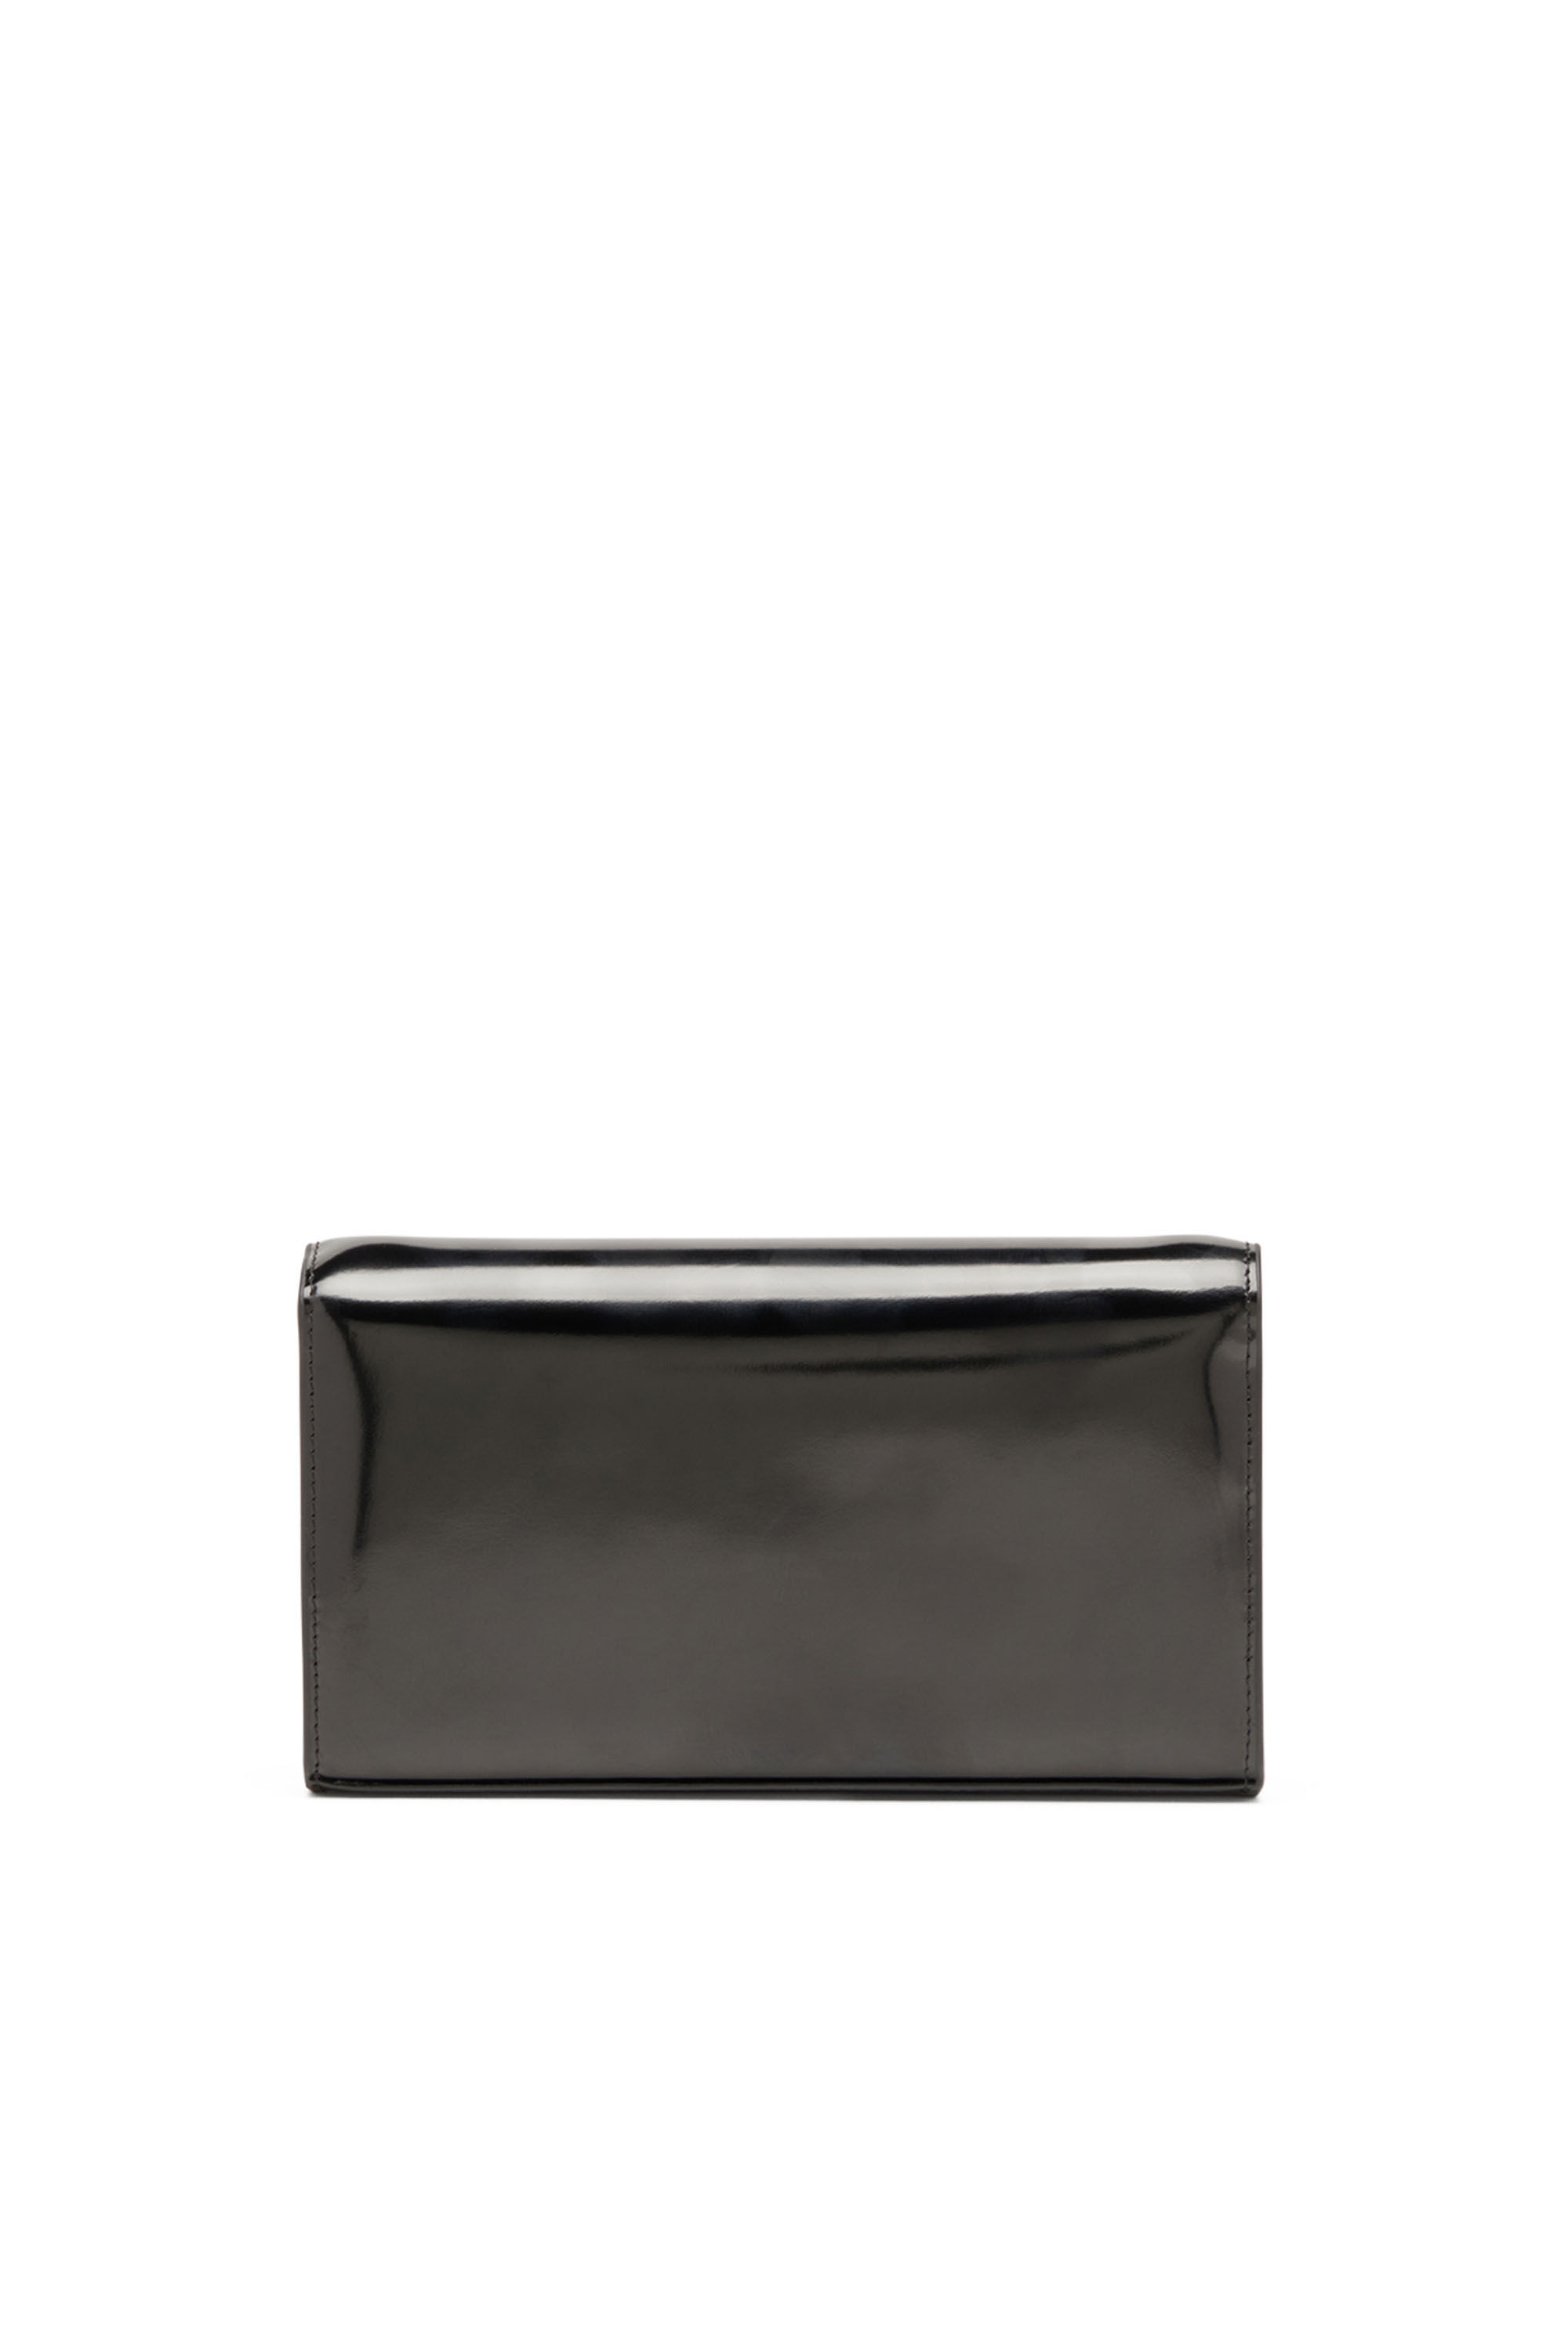 Diesel - 1DR WALLET STRAP, Female Wallet bag in mirrored leather in ブラック - Image 2